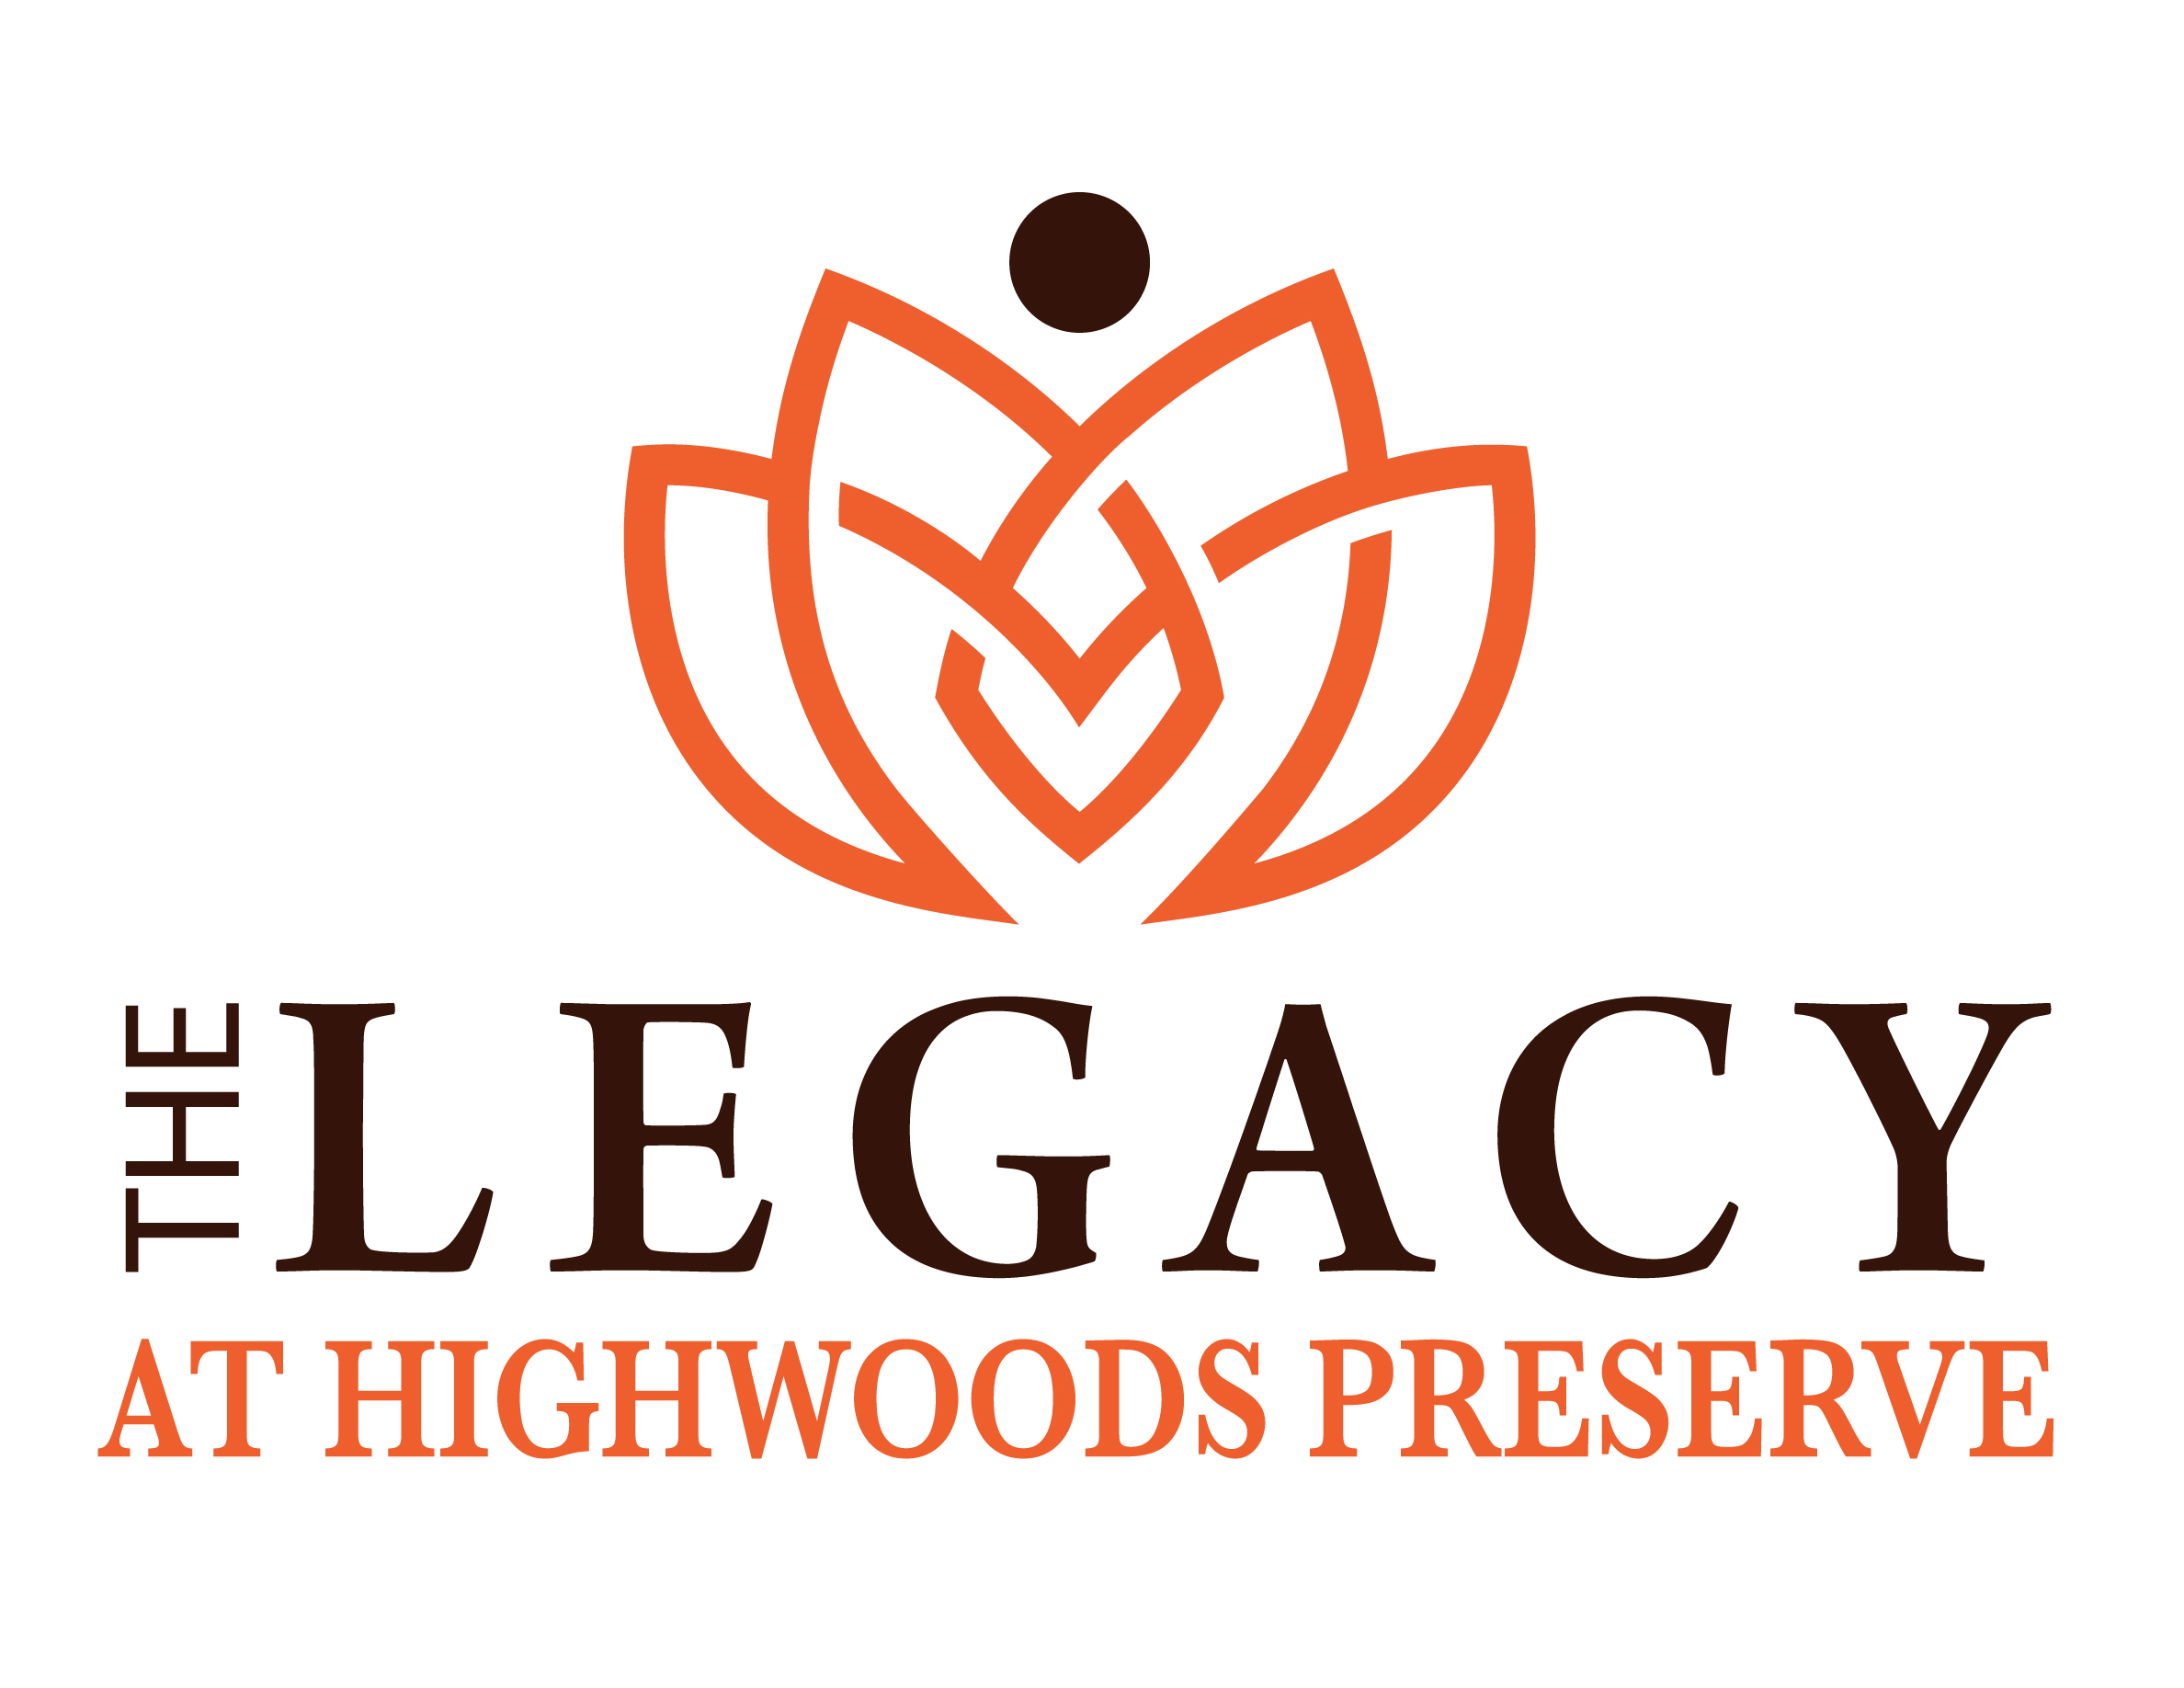 f. Legacy at Highwoods Preserve (Supporting)